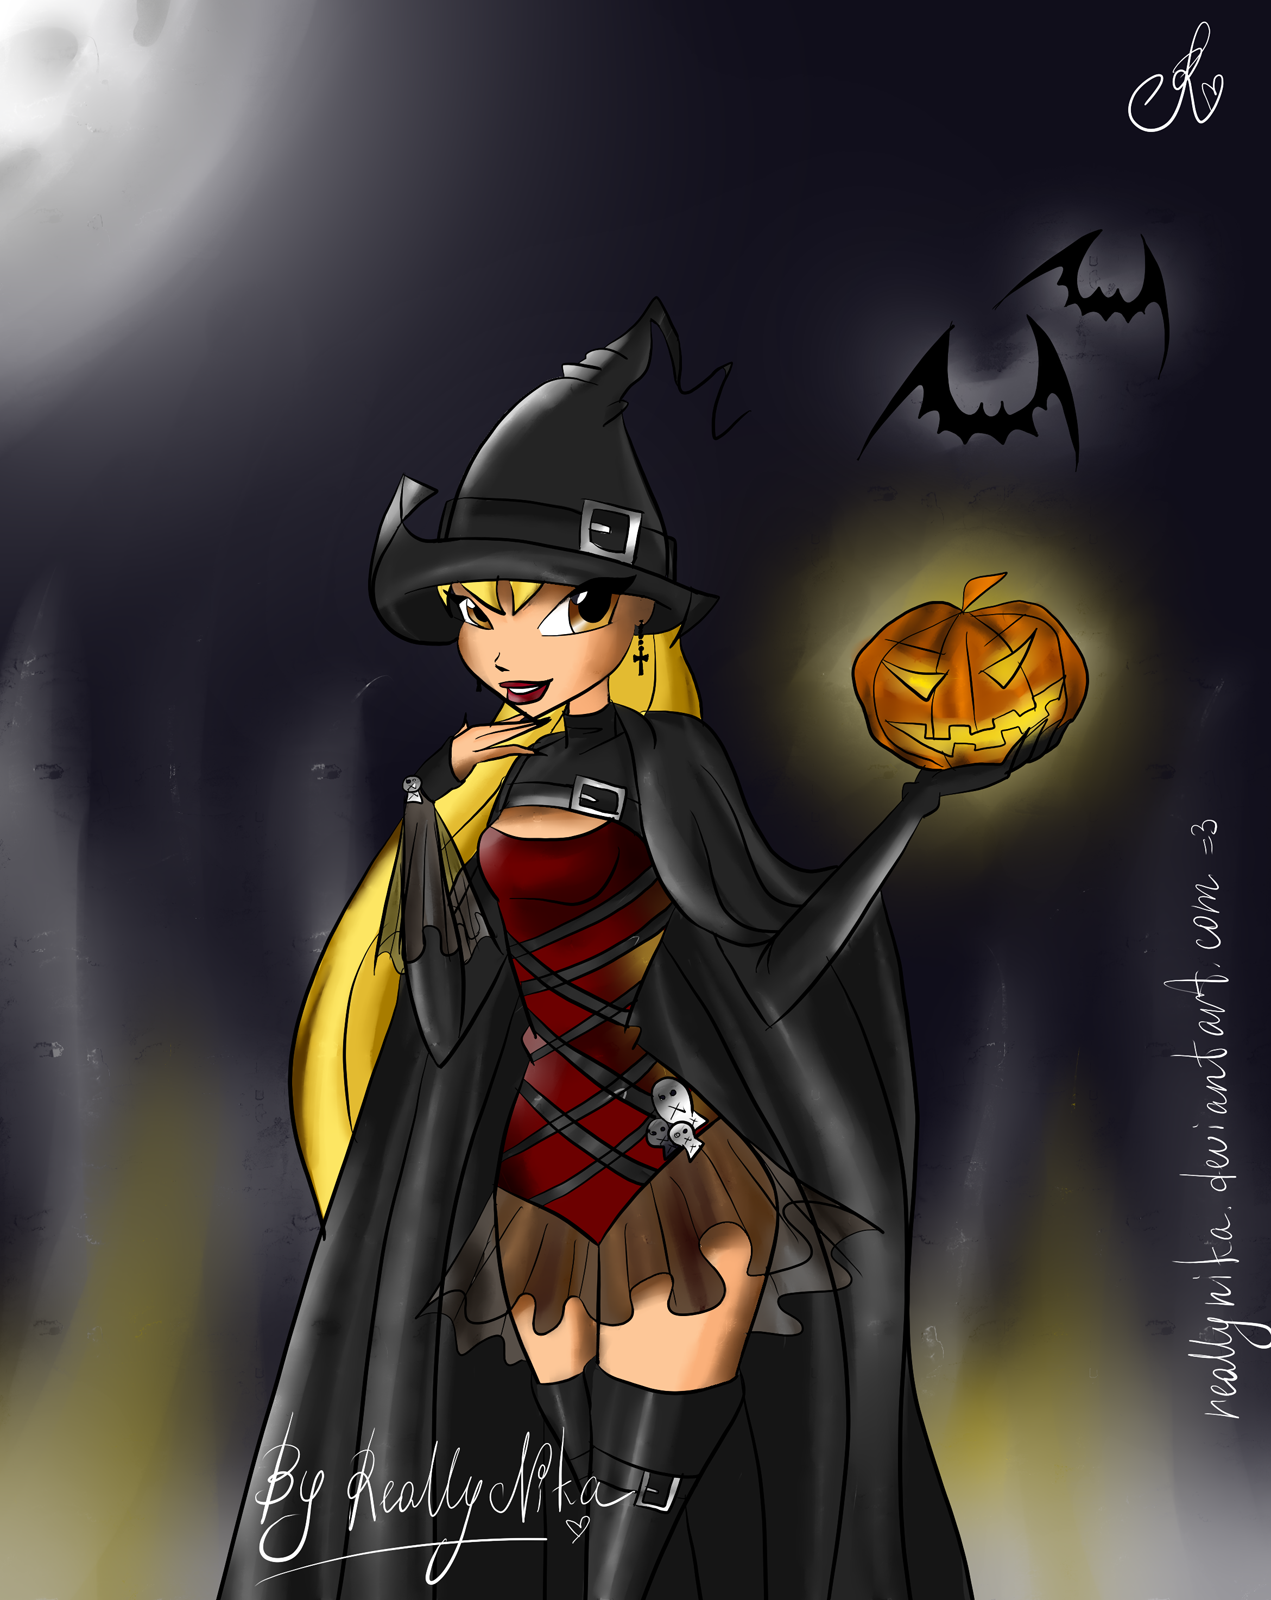 http://www.youloveit.ru/uploads/gallery/main/126/happy_halloween_by_reallynika.png